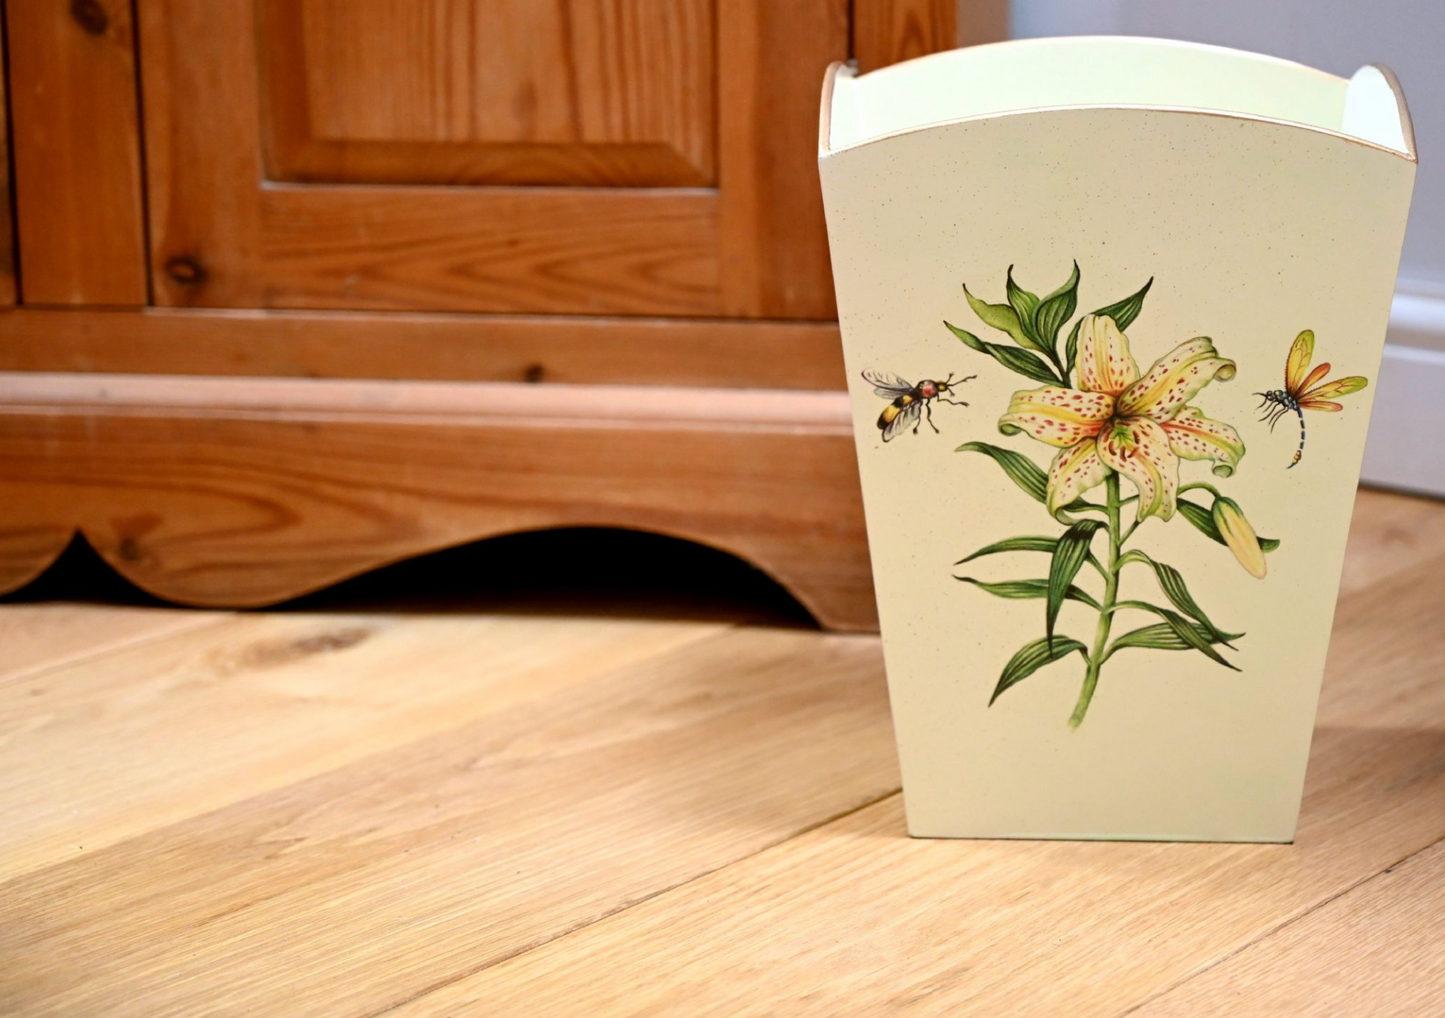 Square Wooden Waste Paper Bin: Japanese Lily